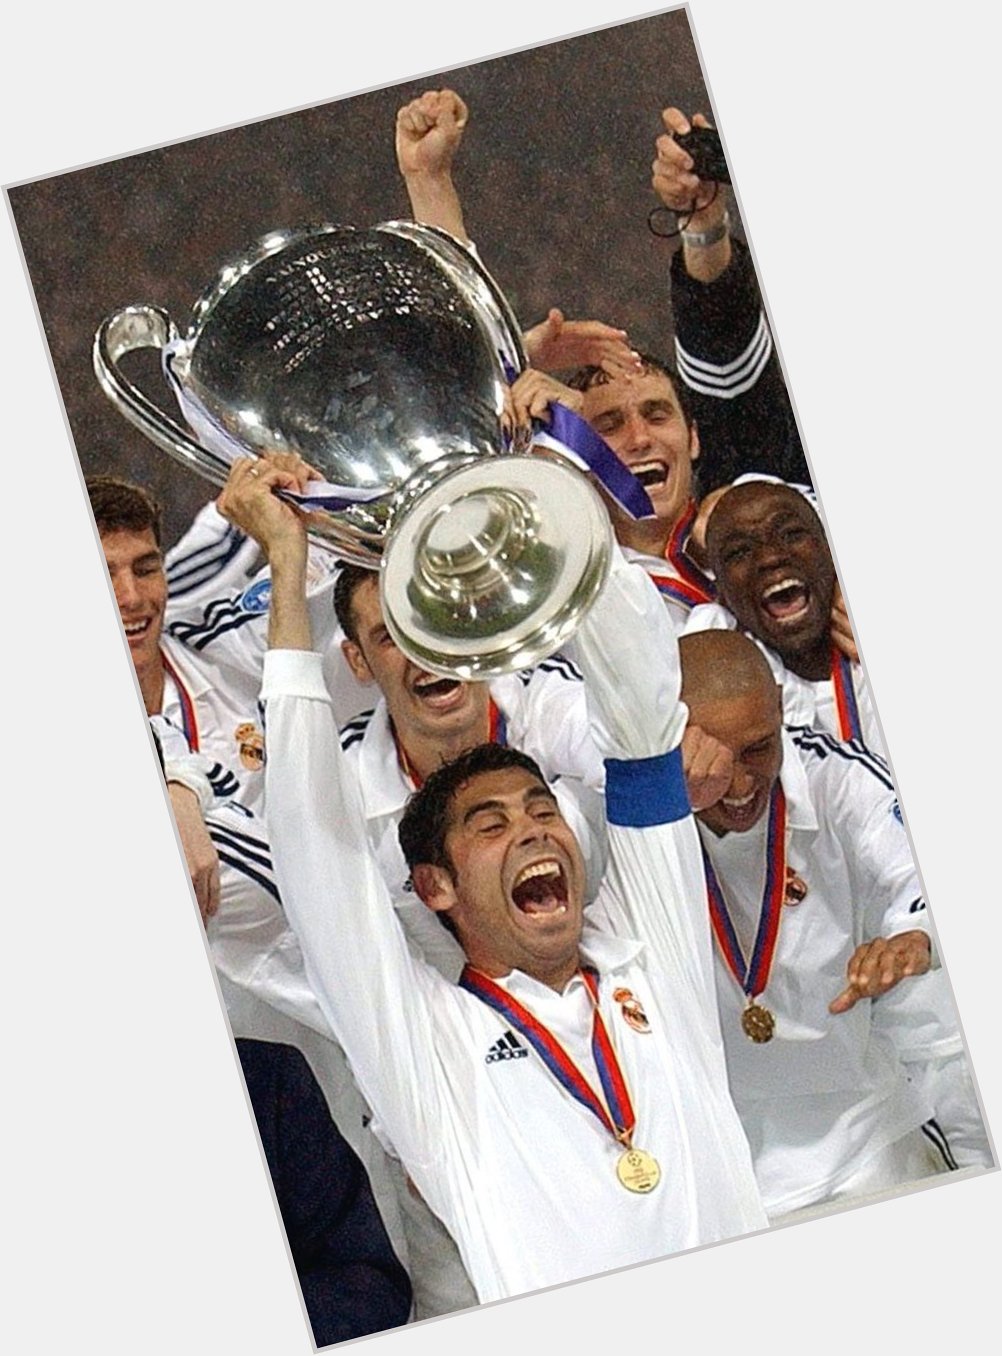 Happy Birthday to another Real Madrid legend, Fernando Hierro. 

Capitán 